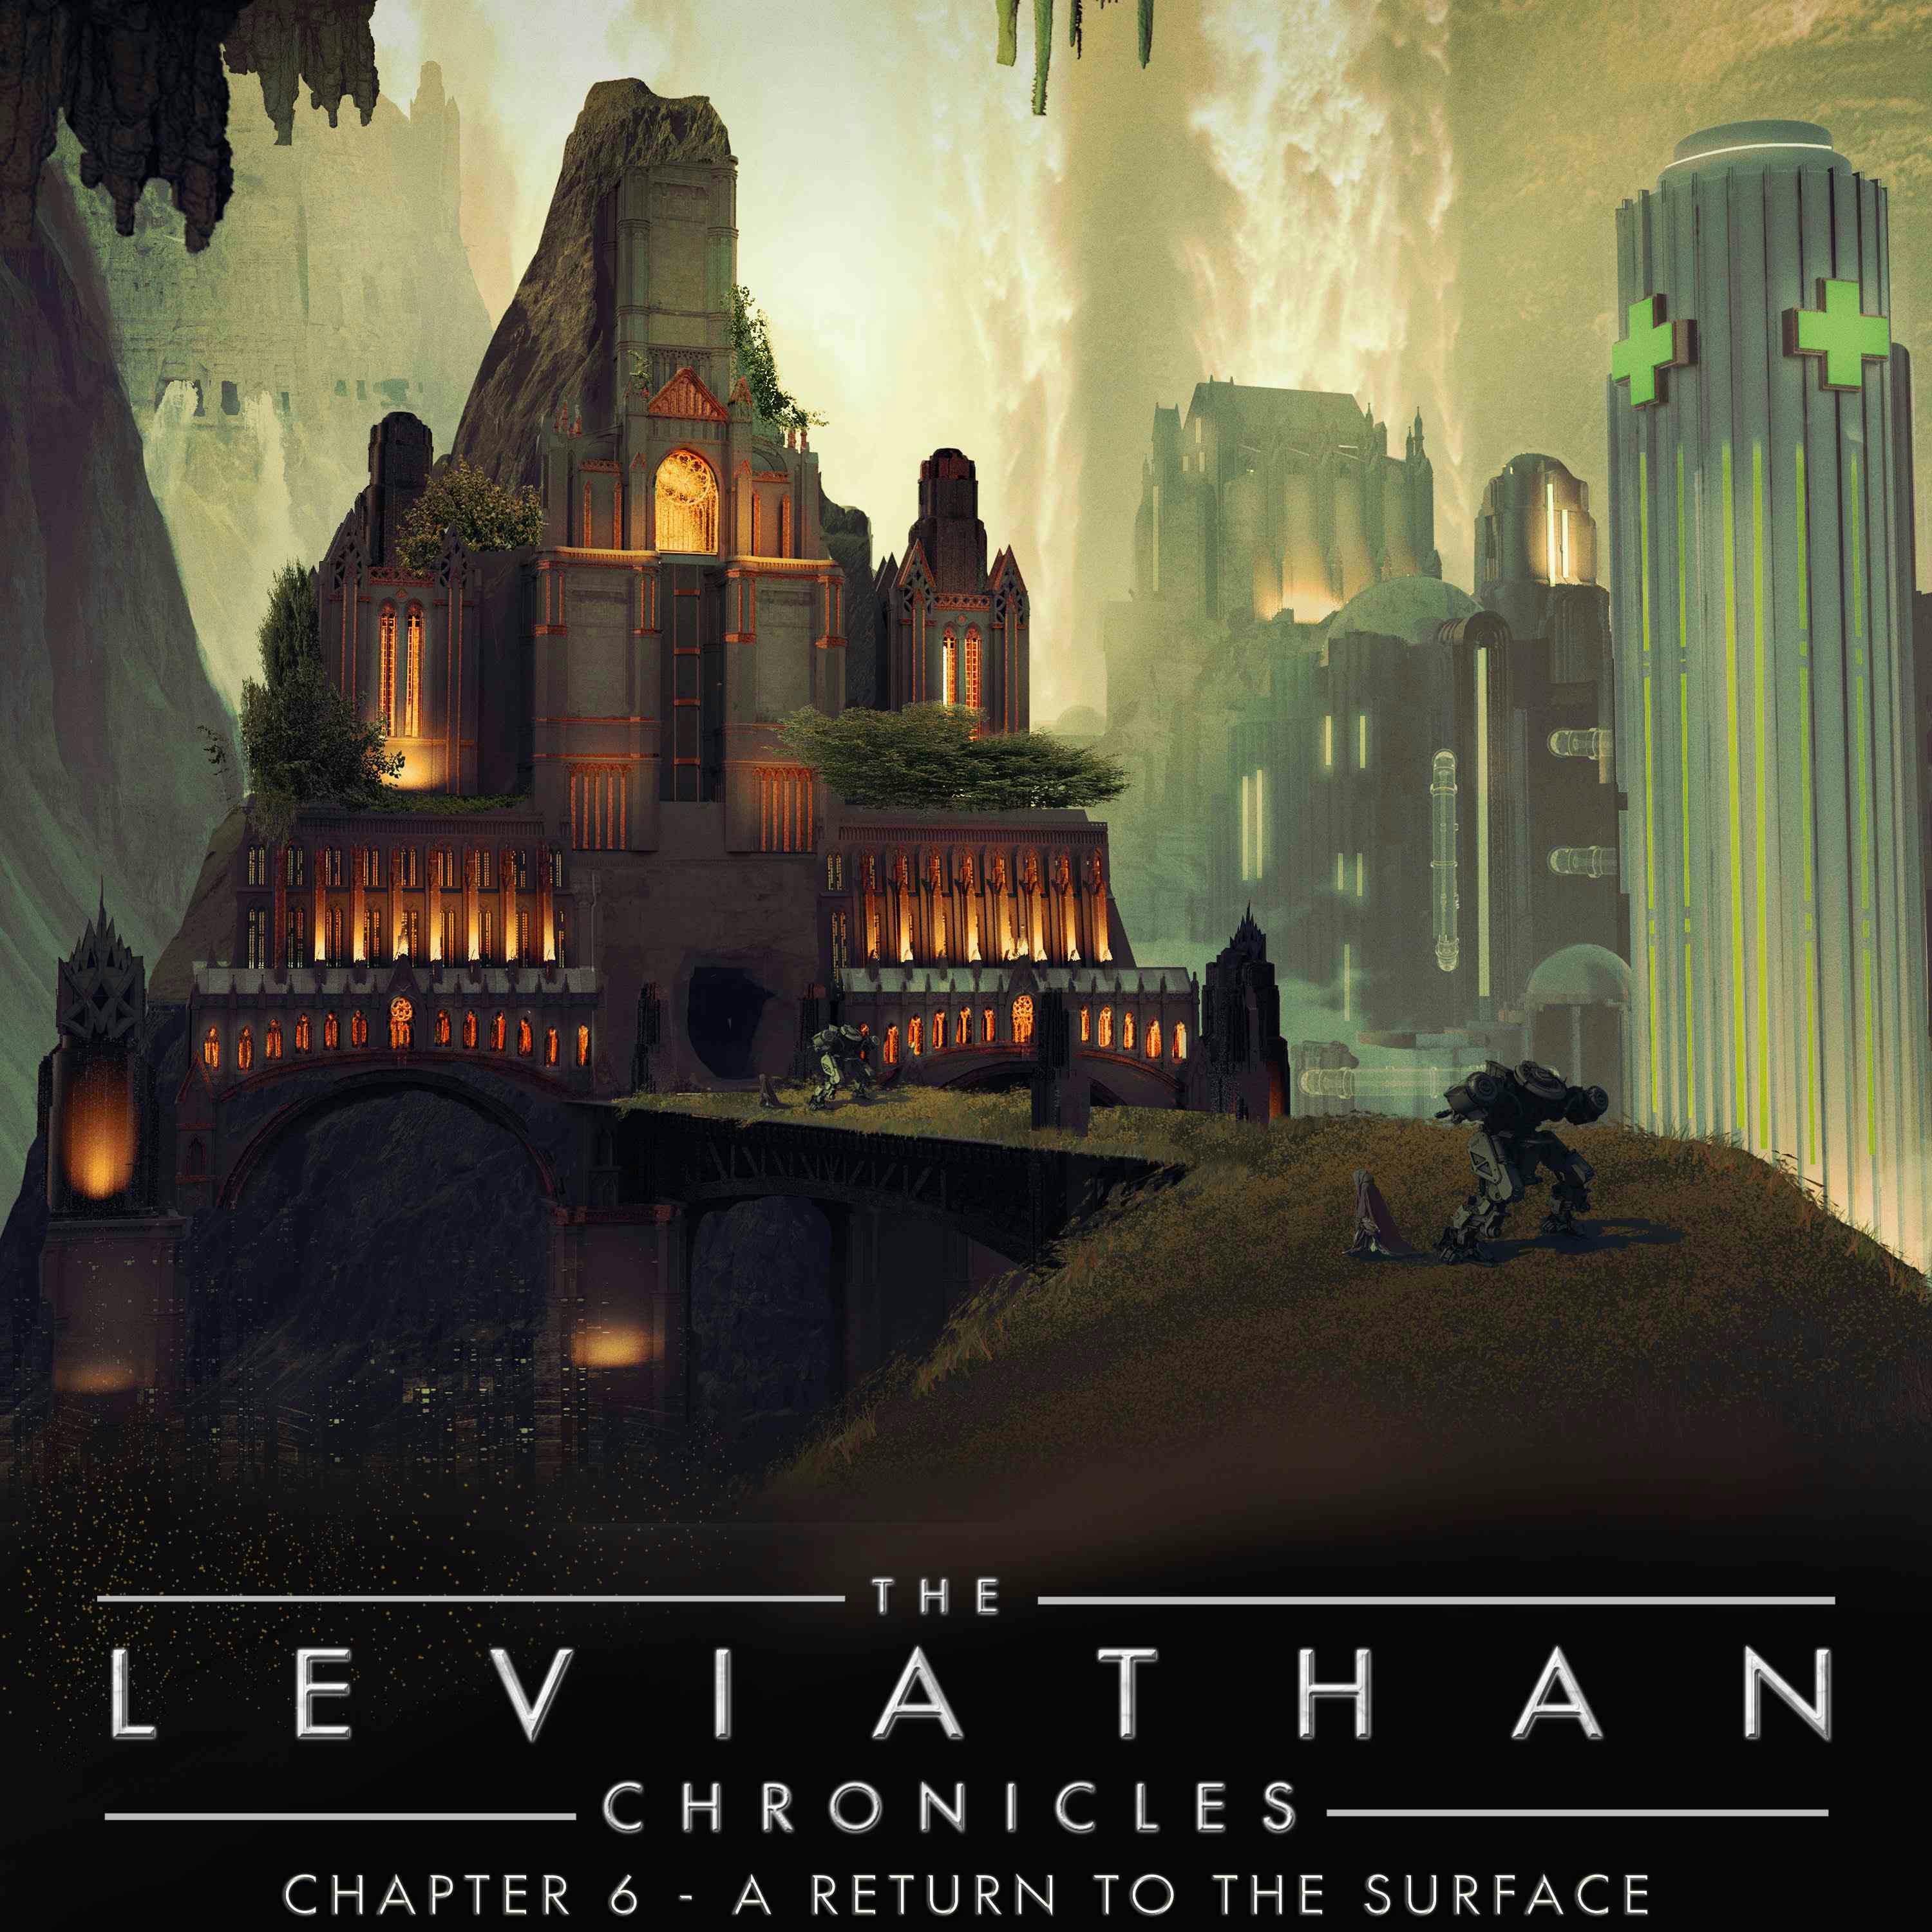 The Leviathan Chronicles | Chapter 6 - A Return to the Surface